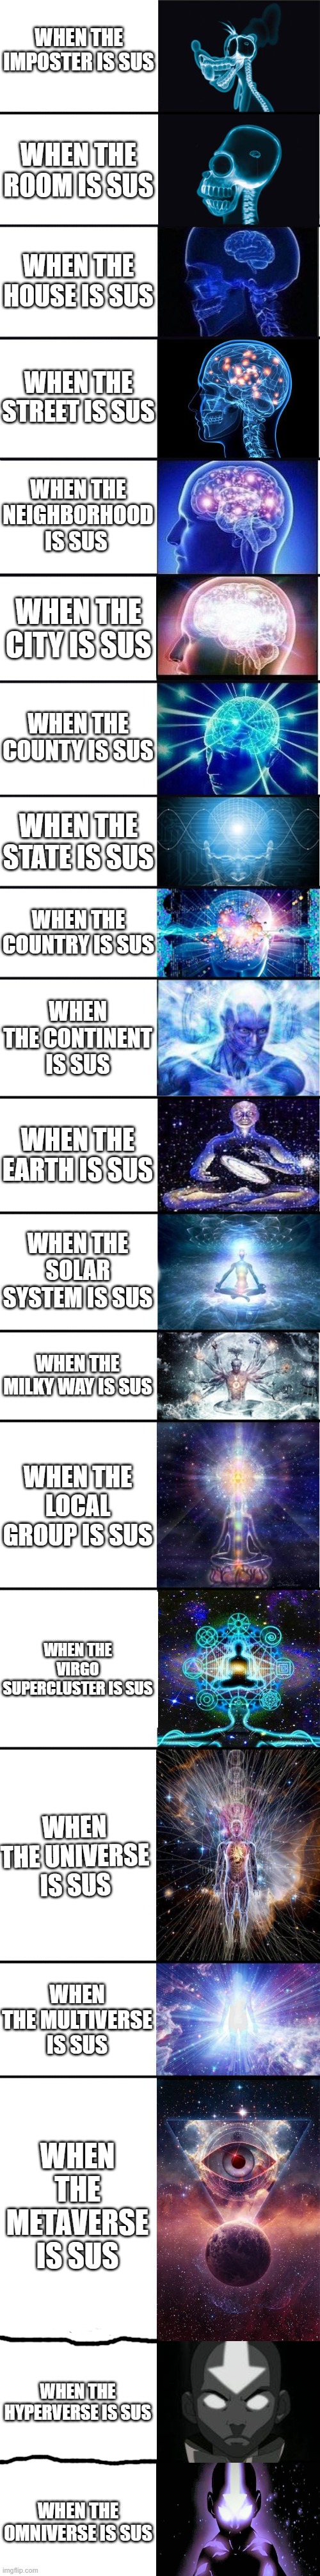 More stuff can be sus! (BTW this is the longest Expanding Brain Meme with 20 panels. I challenge you to make a longer one.) | WHEN THE IMPOSTER IS SUS; WHEN THE ROOM IS SUS; WHEN THE HOUSE IS SUS; WHEN THE STREET IS SUS; WHEN THE NEIGHBORHOOD IS SUS; WHEN THE CITY IS SUS; WHEN THE COUNTY IS SUS; WHEN THE STATE IS SUS; WHEN THE COUNTRY IS SUS; WHEN THE CONTINENT IS SUS; WHEN THE EARTH IS SUS; WHEN THE SOLAR SYSTEM IS SUS; WHEN THE MILKY WAY IS SUS; WHEN THE LOCAL GROUP IS SUS; WHEN THE VIRGO SUPERCLUSTER IS SUS; WHEN THE UNIVERSE IS SUS; WHEN THE MULTIVERSE IS SUS; WHEN THE METAVERSE IS SUS; WHEN THE HYPERVERSE IS SUS; WHEN THE OMNIVERSE IS SUS | image tagged in expanding brain 9001,among us,sus,avatar the last airbender,avatar,unnecessary tags | made w/ Imgflip meme maker